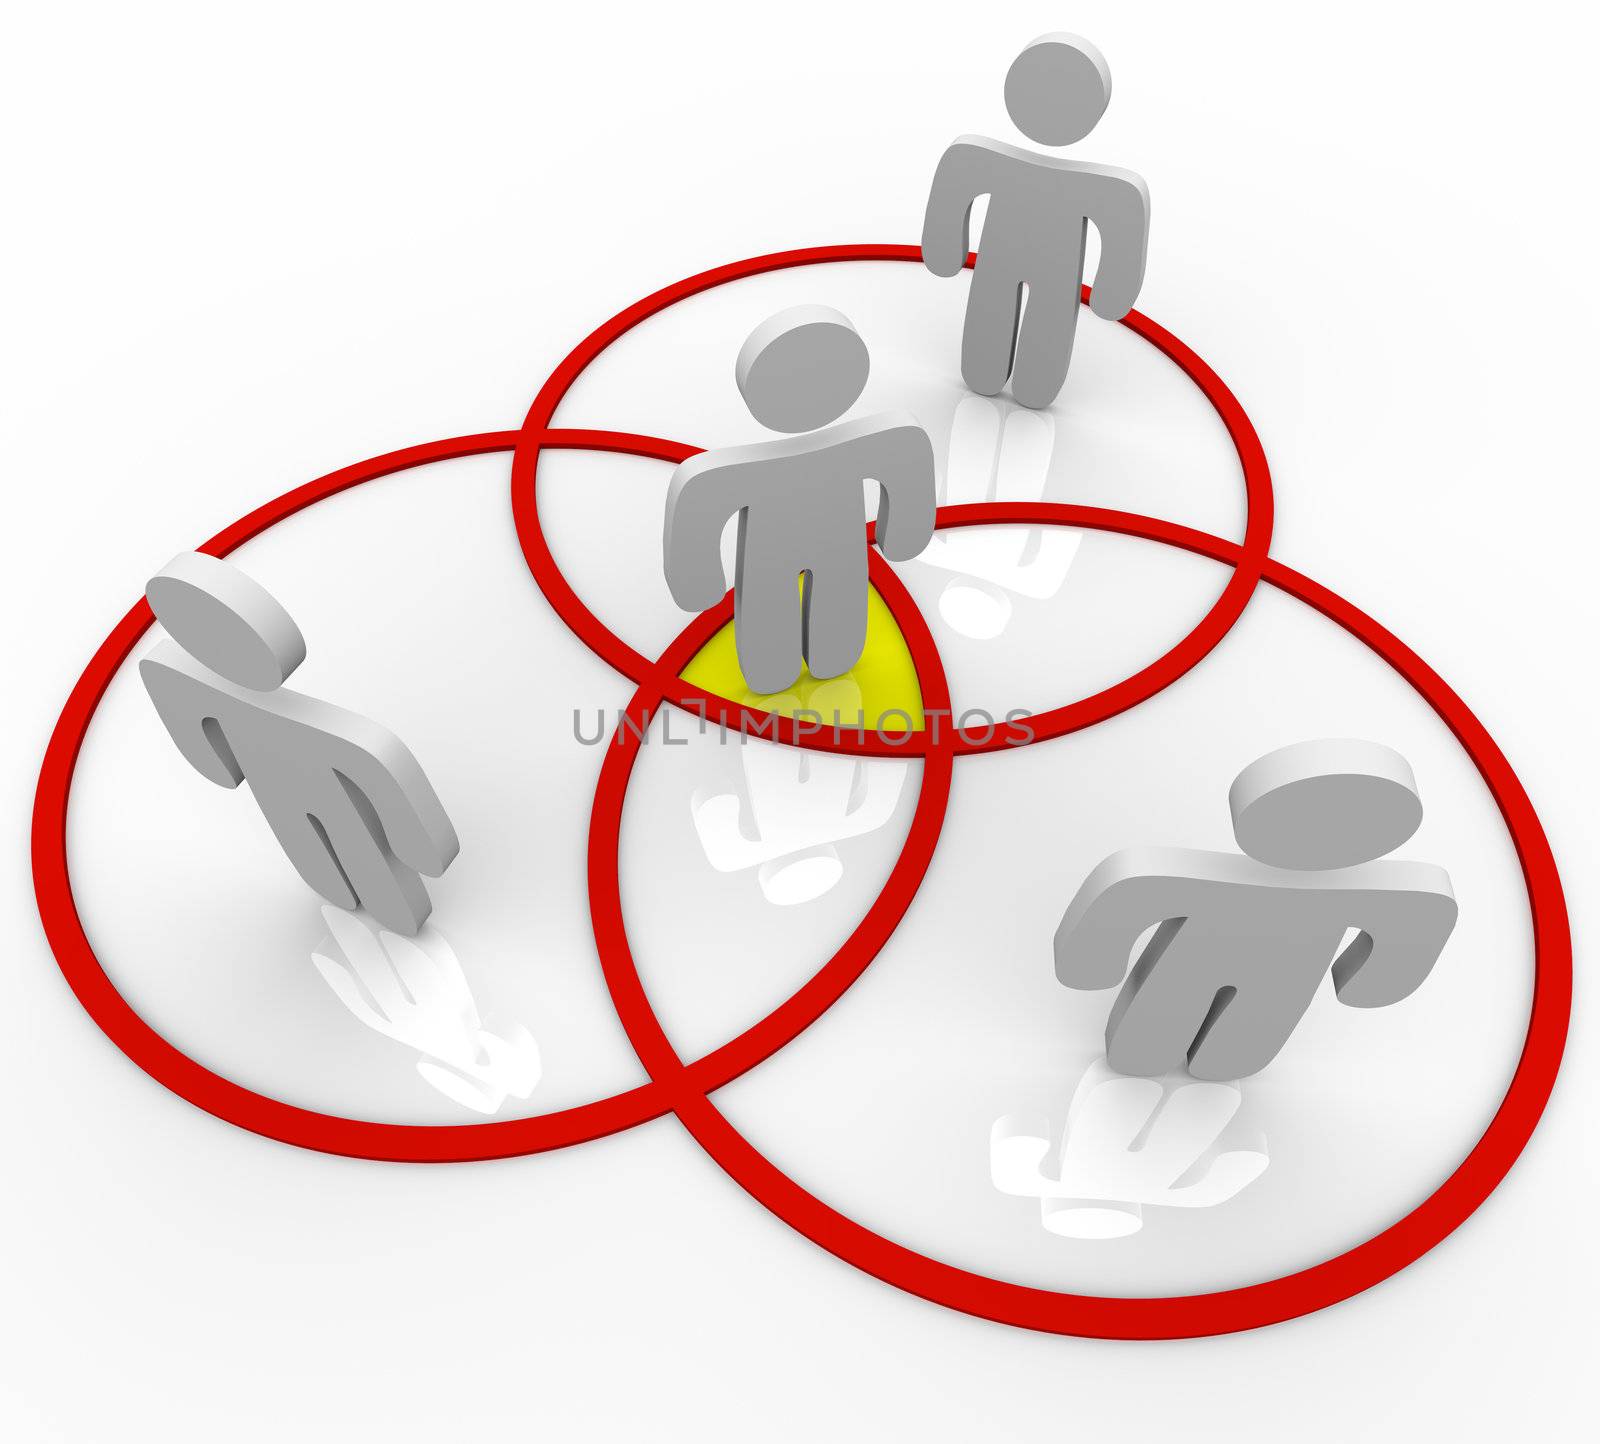 Several networking people or friends stand in venn diagram circles with one person in the center core as the central figure comman to all of the networks